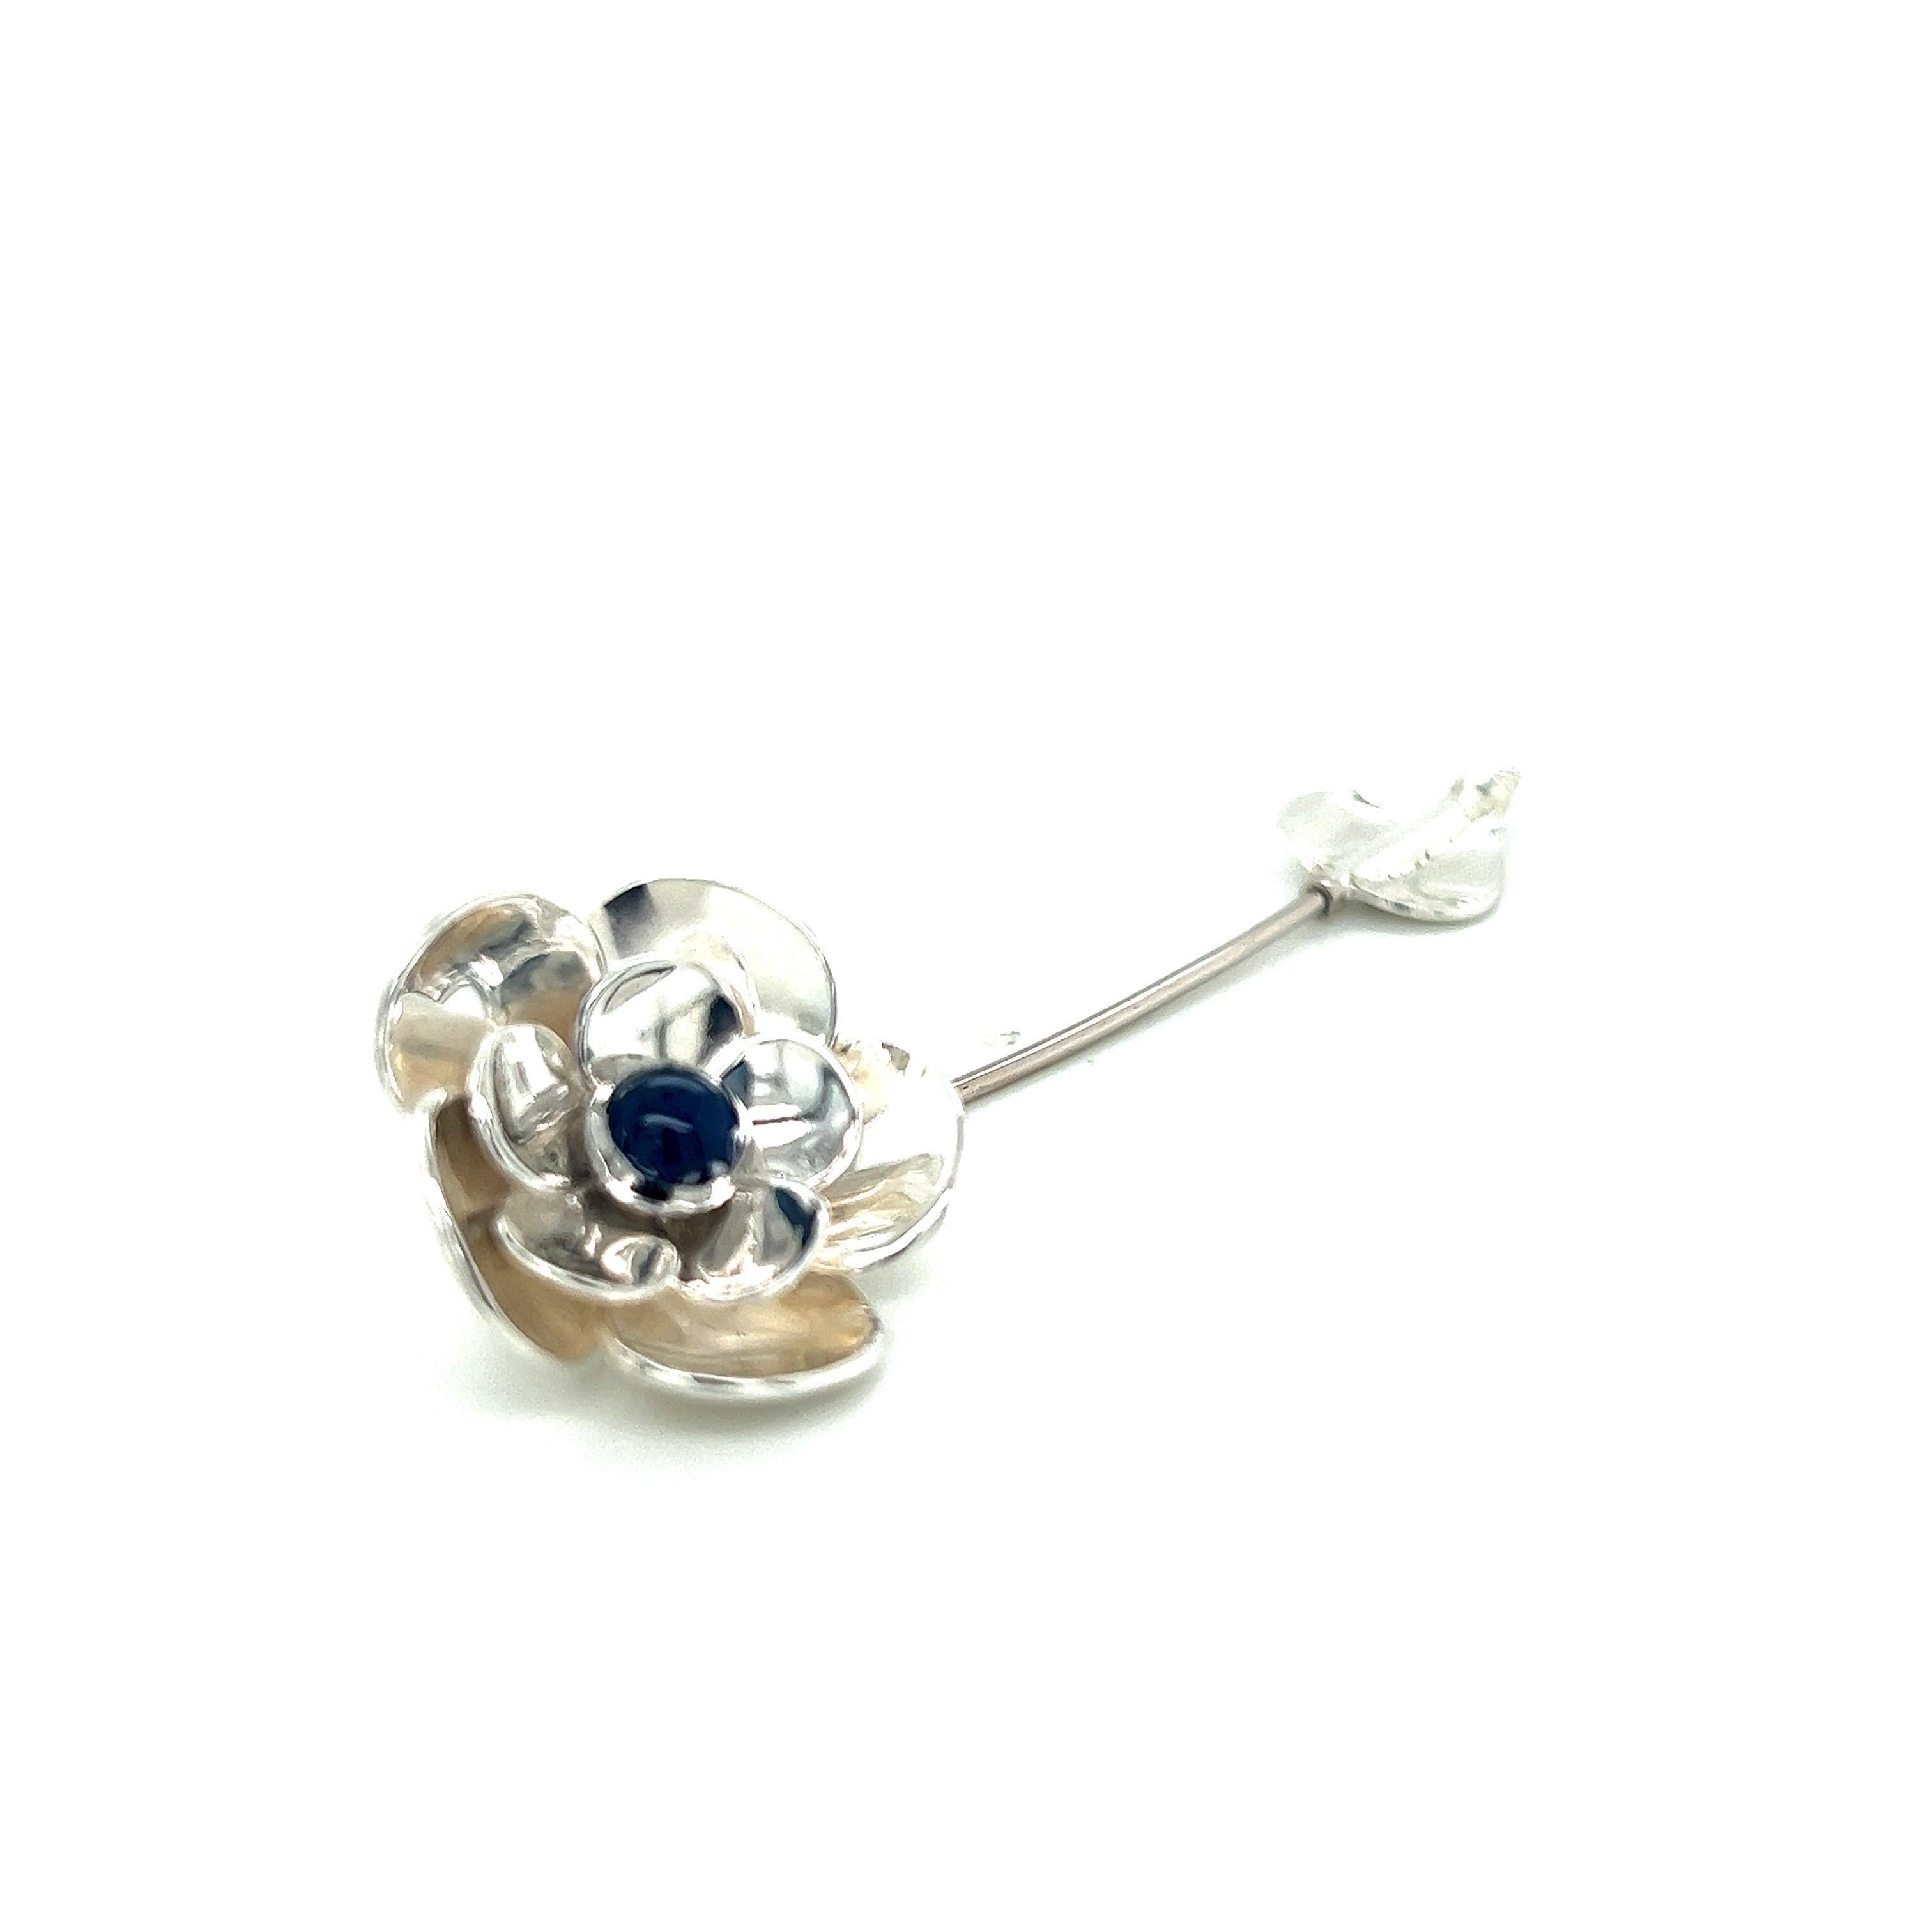 Sterling Silver, Platinum, and 14k White Gold Flower Pin with Cabochon Sapphire For Sale 2